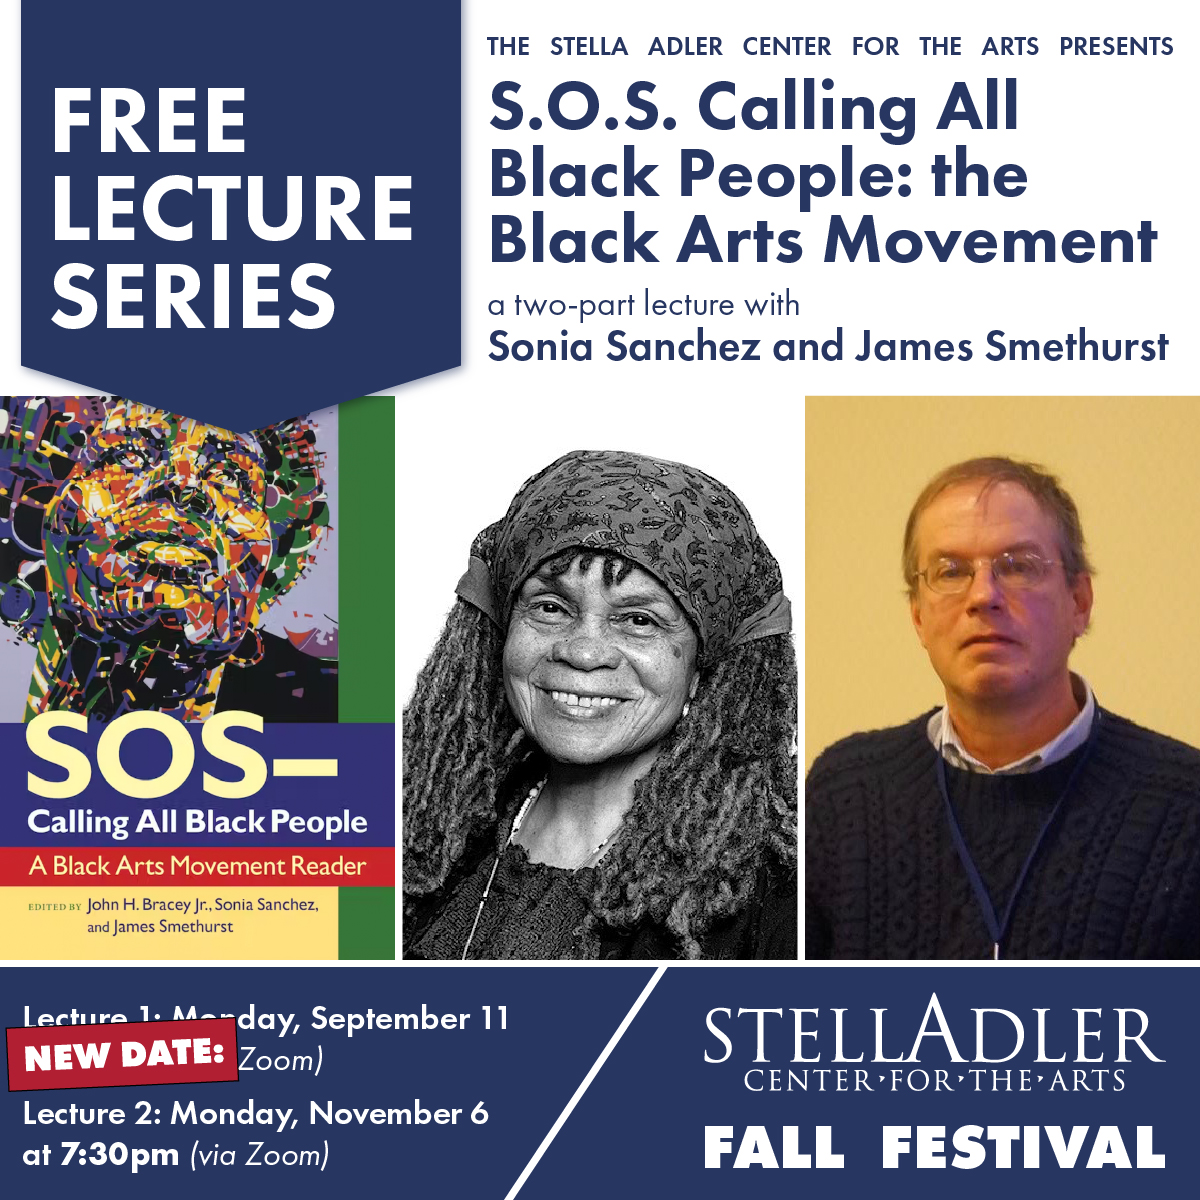 Please join us for tonight's event with Sonia Sanchez and James Smethurst, SOS: Calling All Black People - Black Arts Movement, Part 2. It's free because access to great artists, ideas and our vital history should be! 11/6 @ 7:30pm ET. Register @Zoom us02web.zoom.us/webinar/regist…